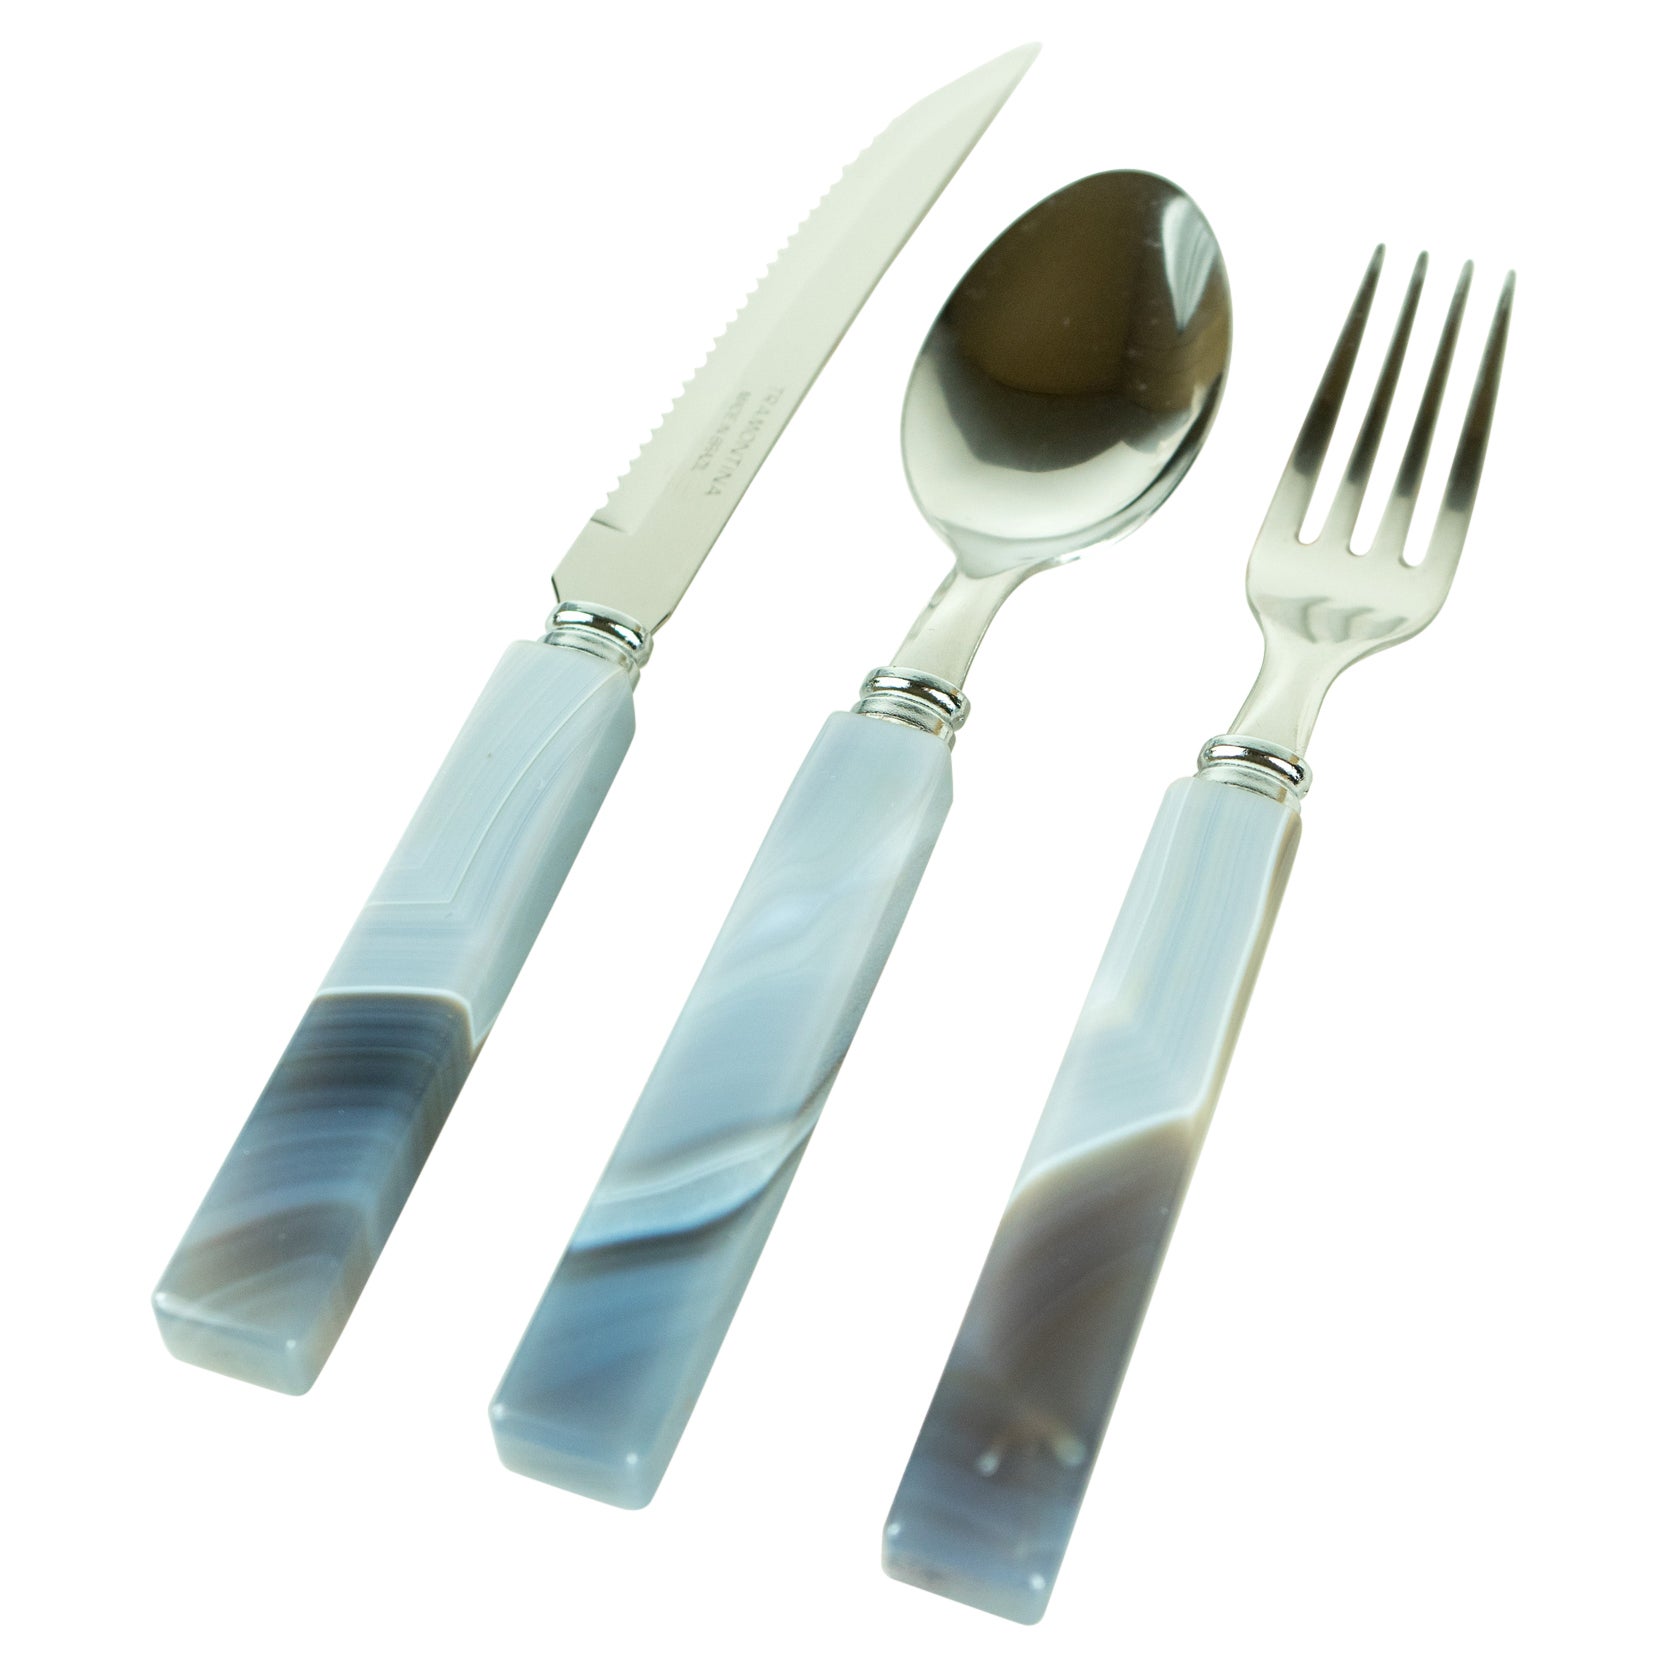 Handmade Red Lace Agate with Stainless Steel Cutlery Tableware Set, Serves 6 For Sale